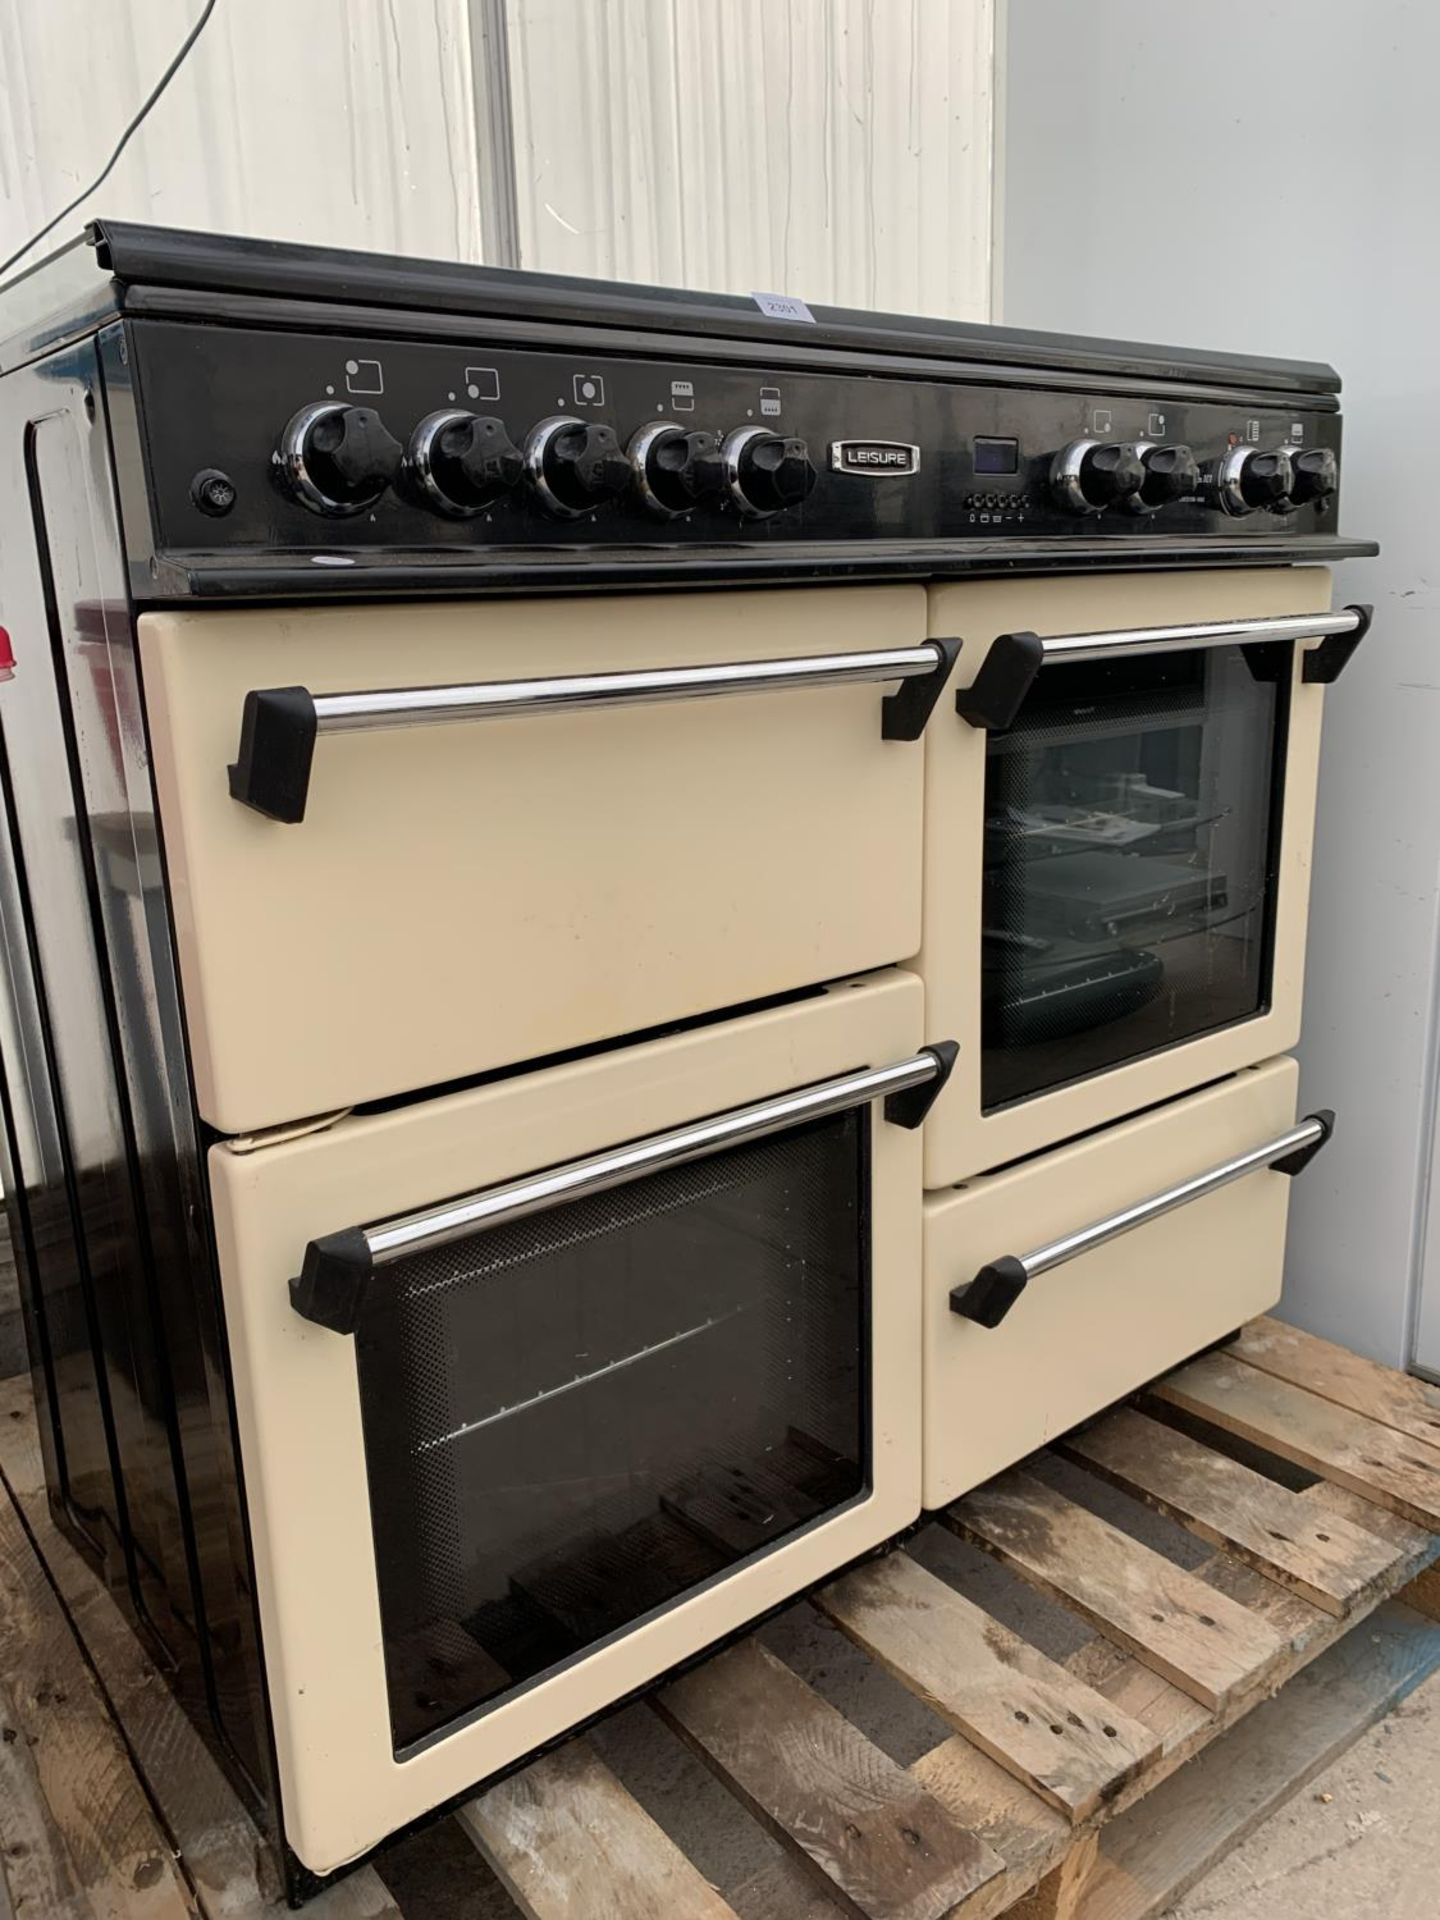 A CREAM LEISURE COOKMASTER 101 GAS RANGE COOKER (LENGTH 100CM) - Image 2 of 6